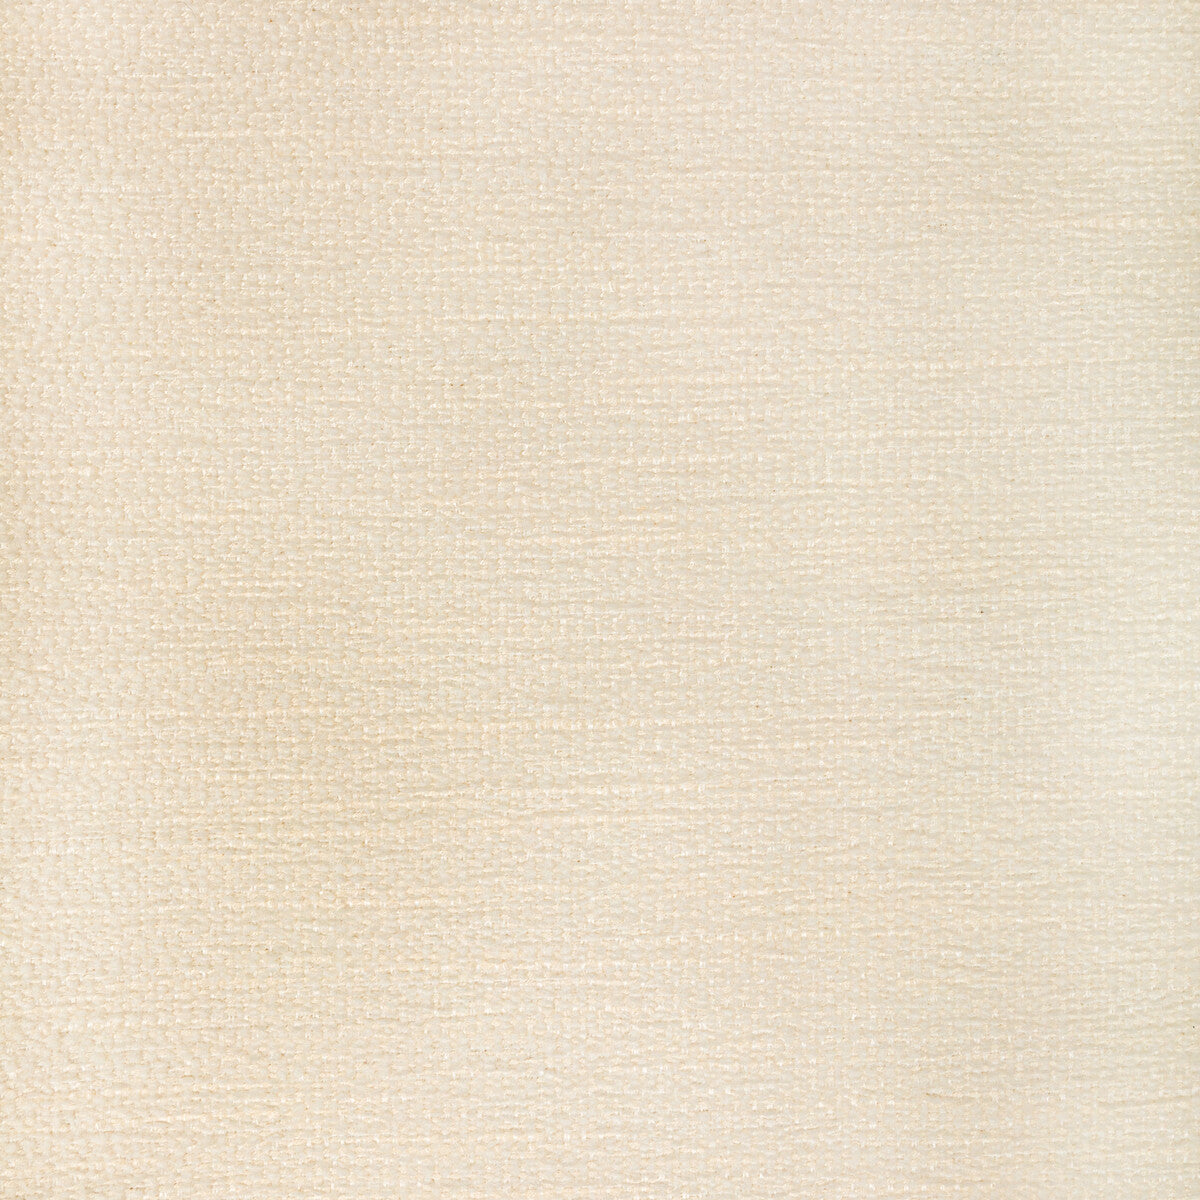 Recoup fabric in sandbar color - pattern 36569.1.0 - by Kravet Contract in the Seaqual collection